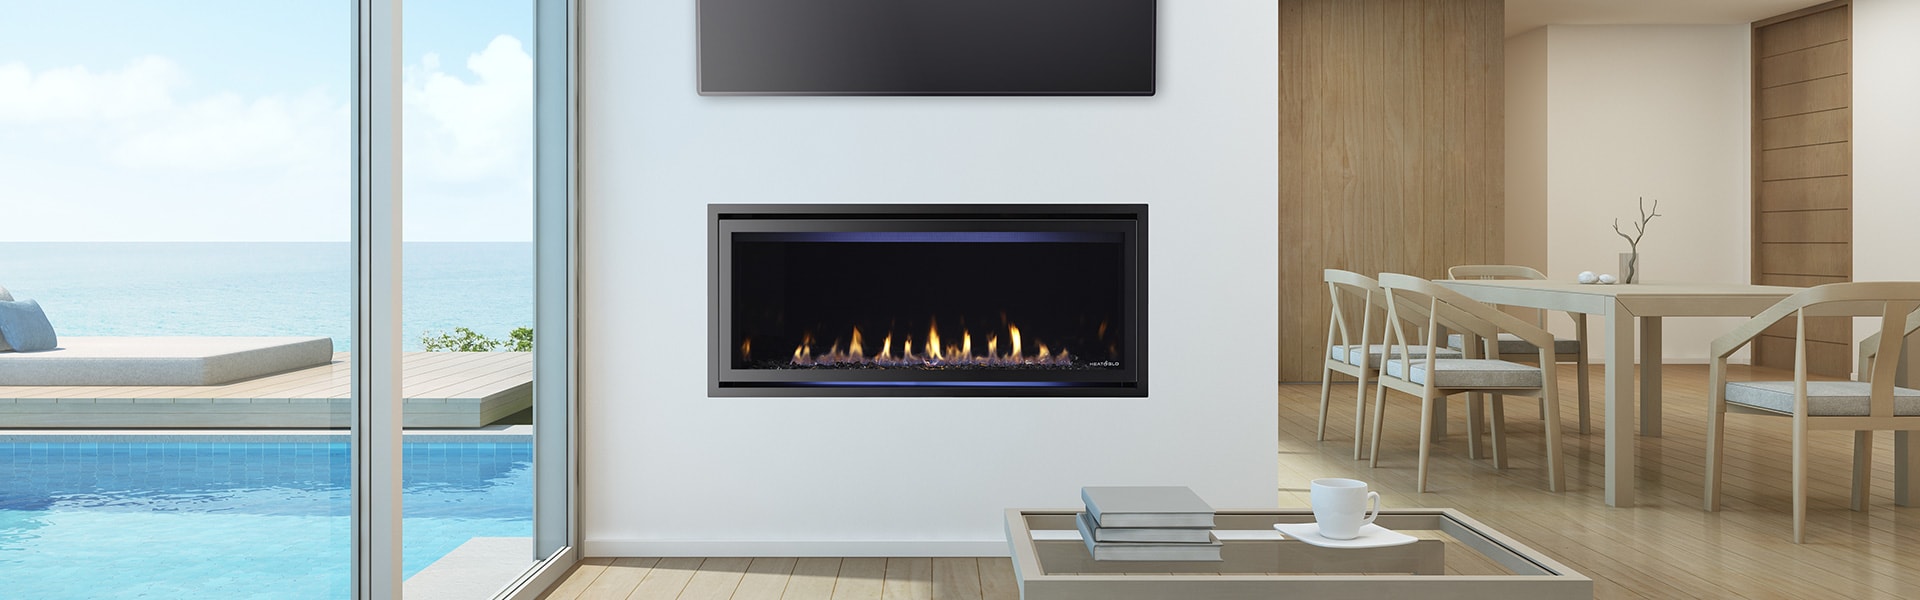 Running Gas Line to Existing Fireplace Luxury Cosmo 42 Gas Fireplace